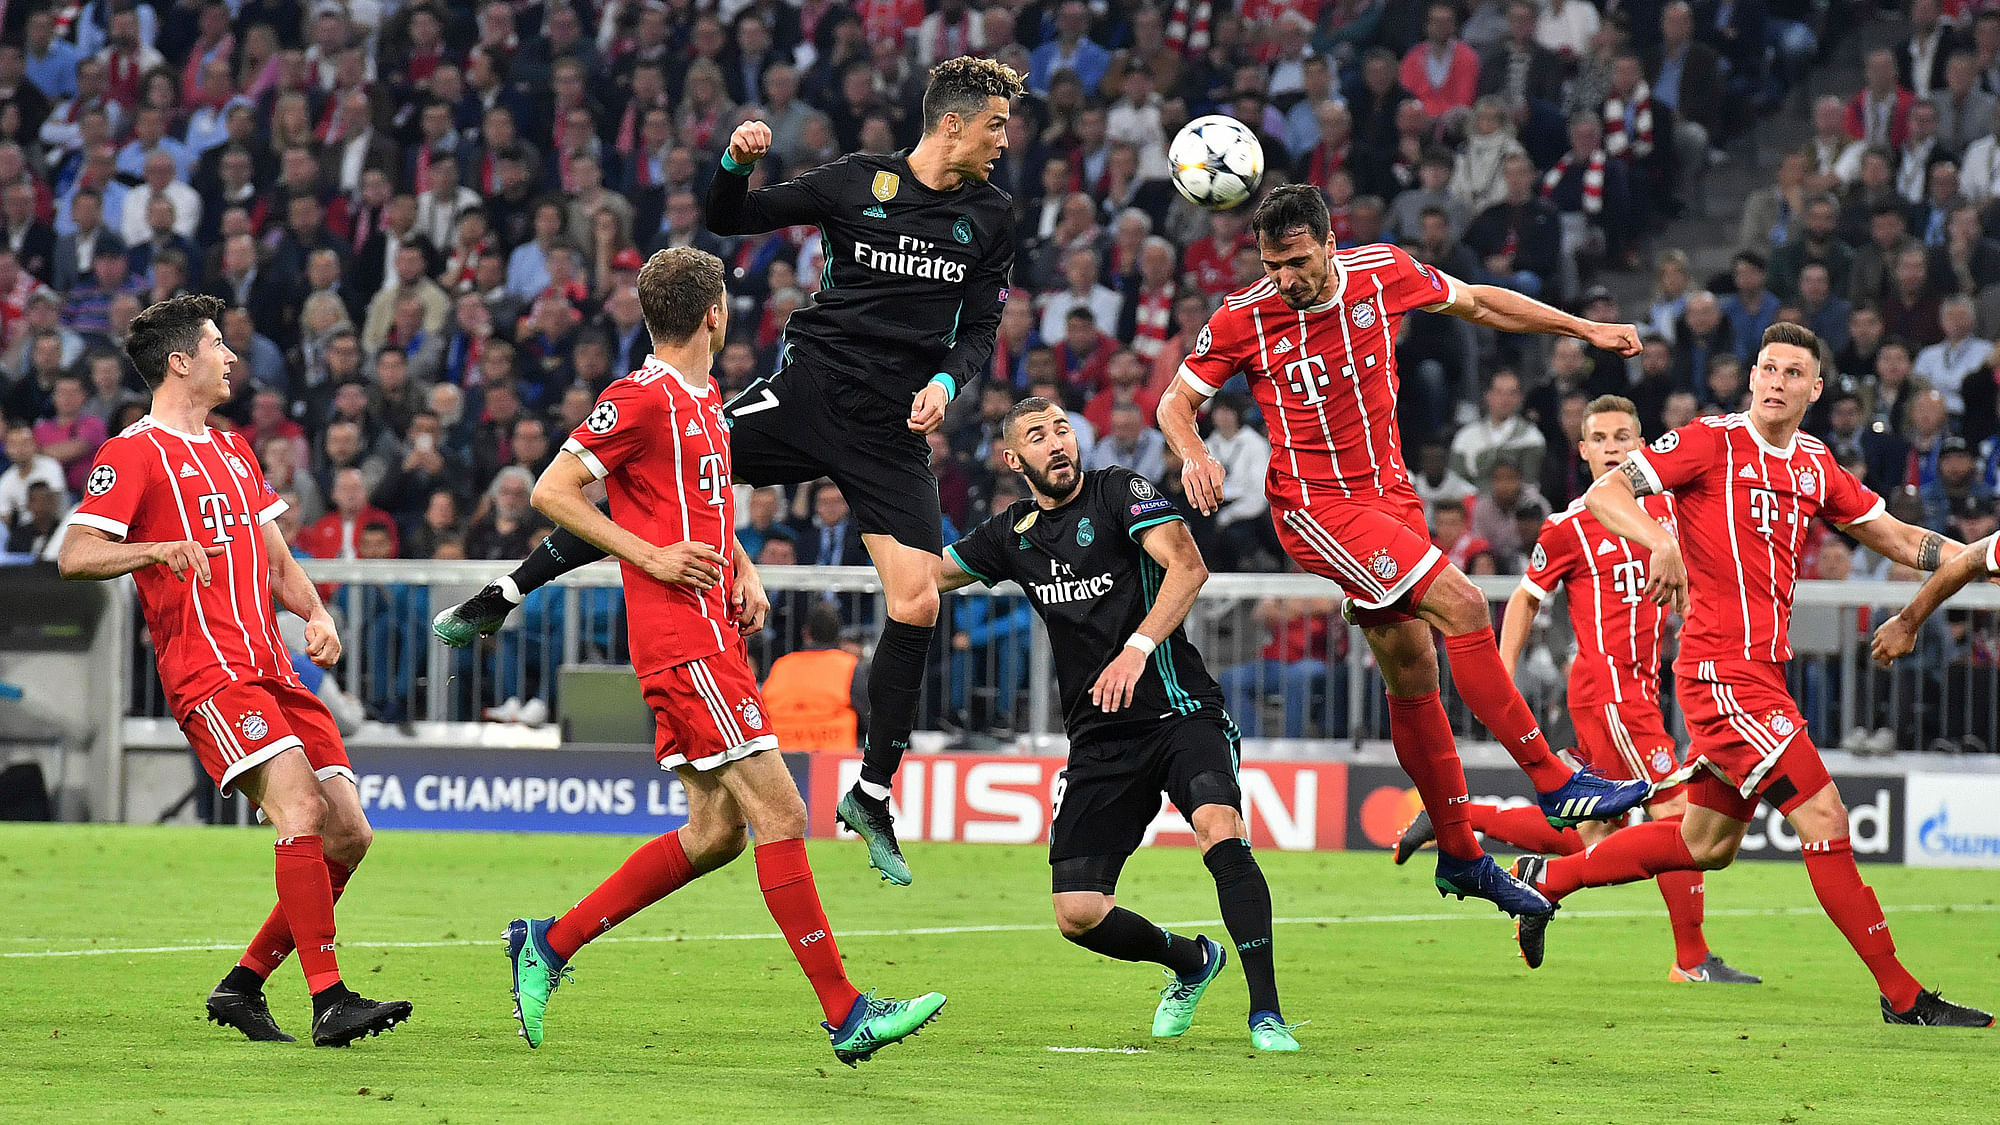 Real Madrid’s Cristiano Ronaldo, center, heads the ball during the semifinal first leg soccer match between FC Bayern Munich and Real Madrid at the Allianz Arena stadium in Munich, Germany, Wednesday, April 25, 2018.&nbsp;